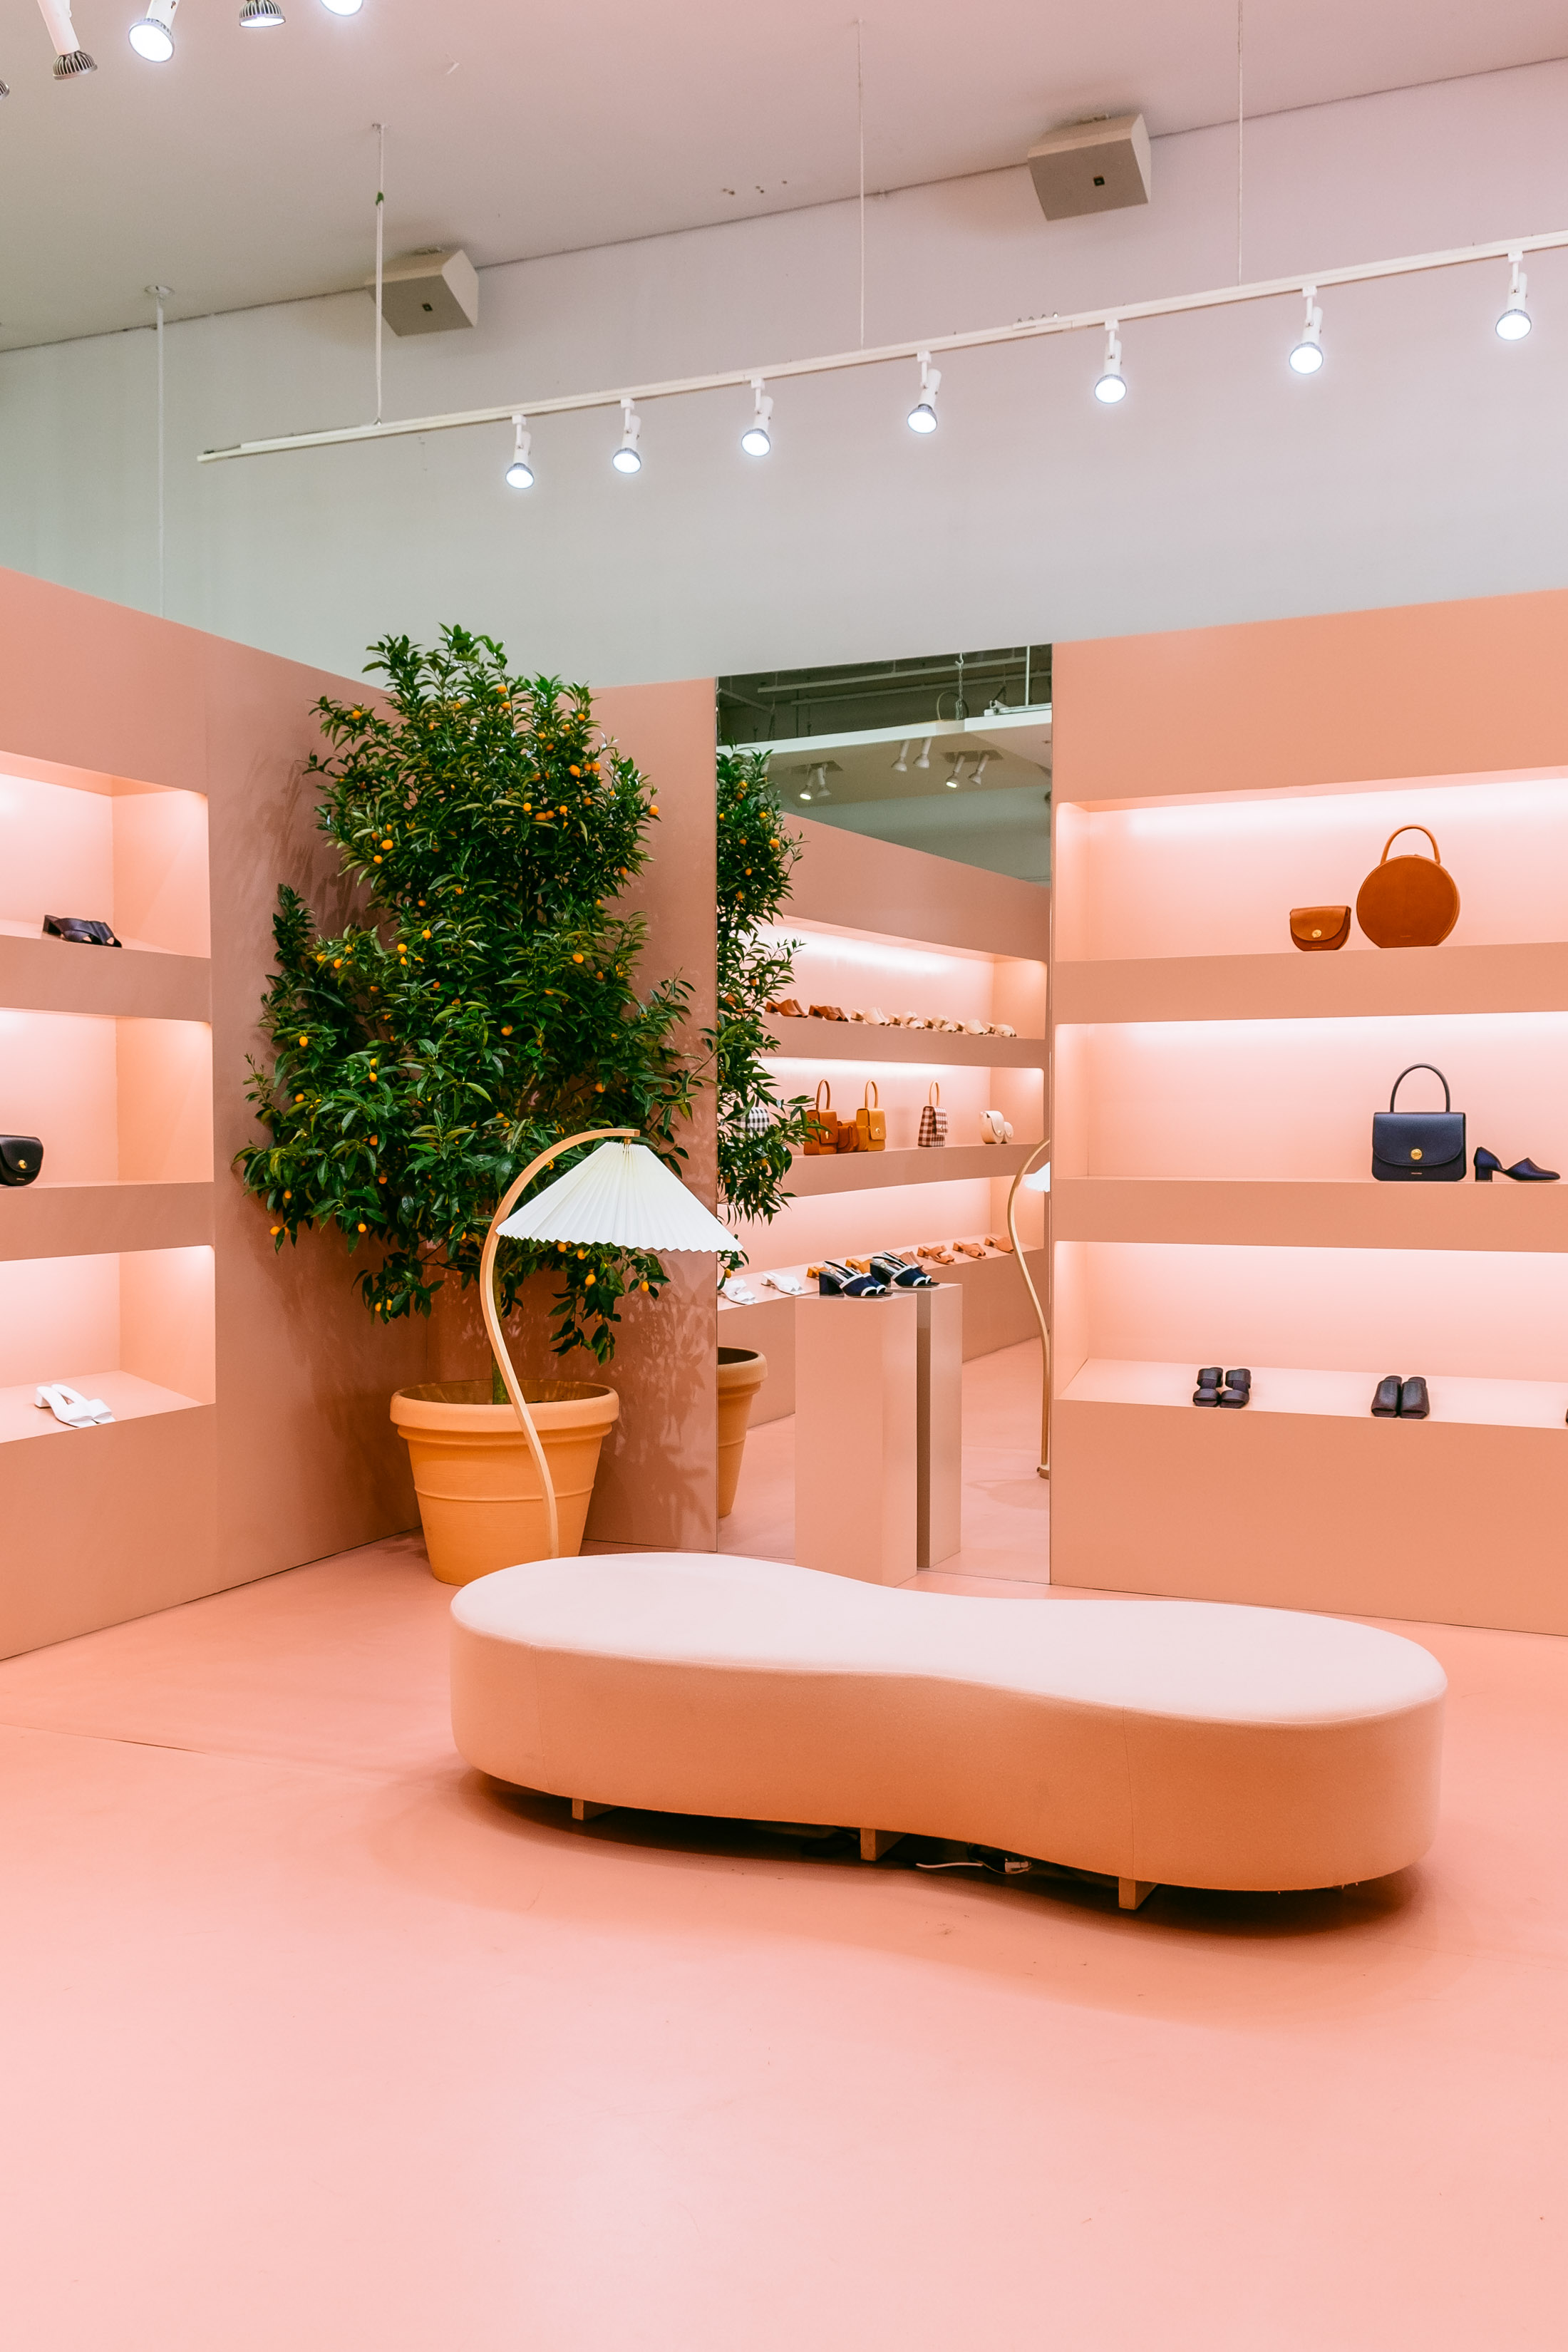 Mansur Gavriel's wall to wall pink interiors in Soho